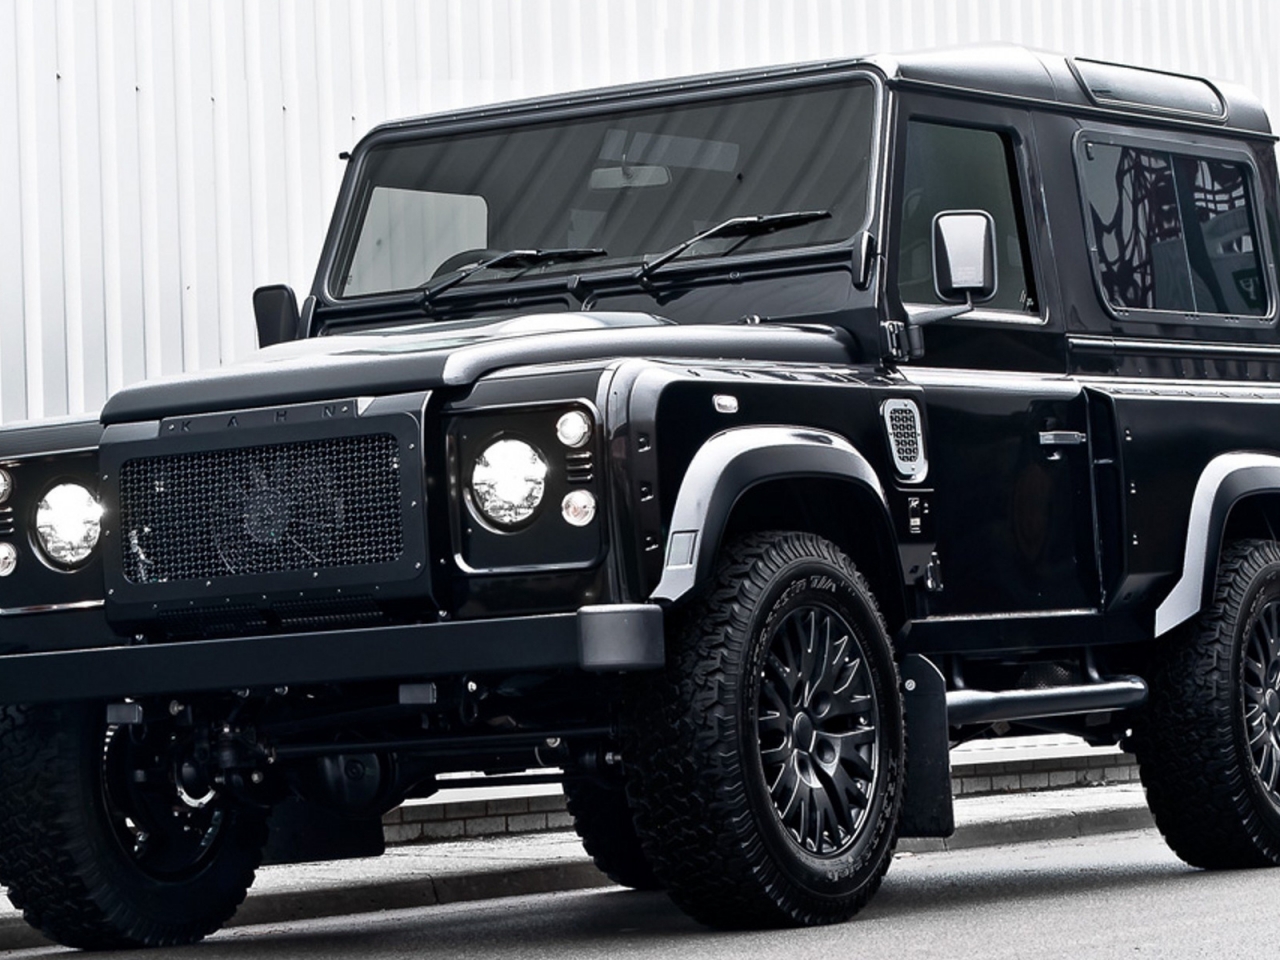 Land Rover Defender Military Edition Kahn Edition for 1280 x 960 resolution